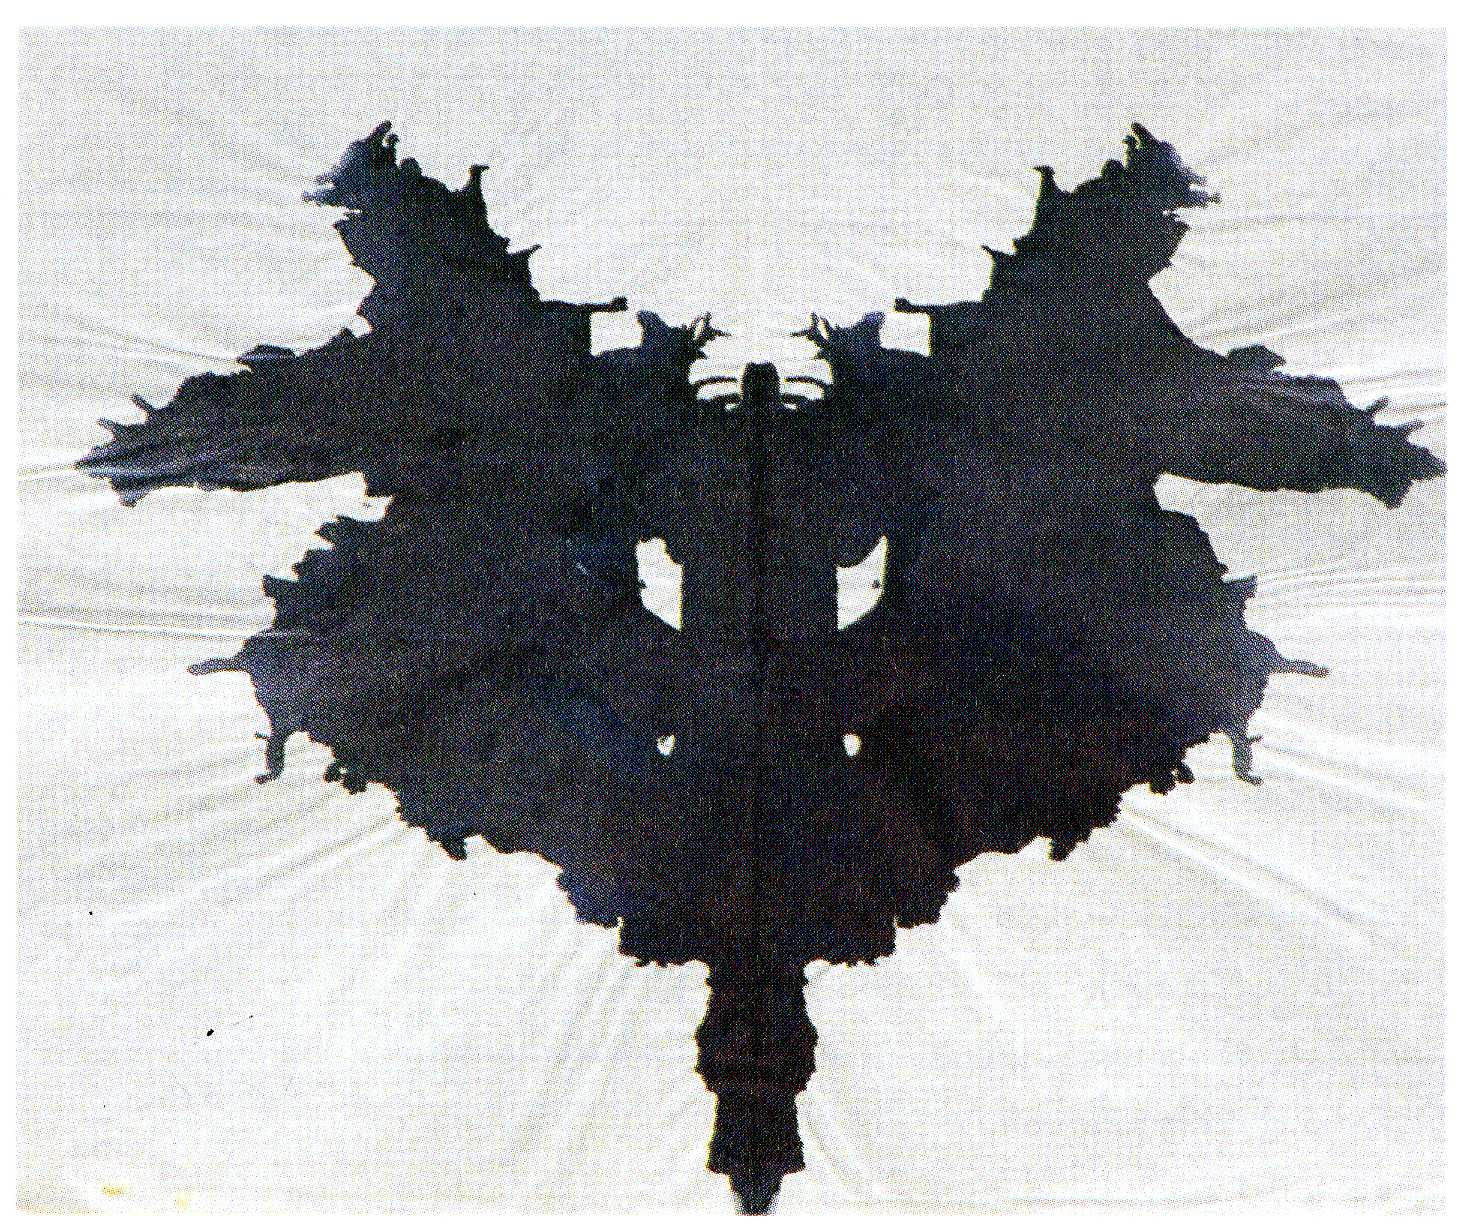 A Brief History of the Rorschach